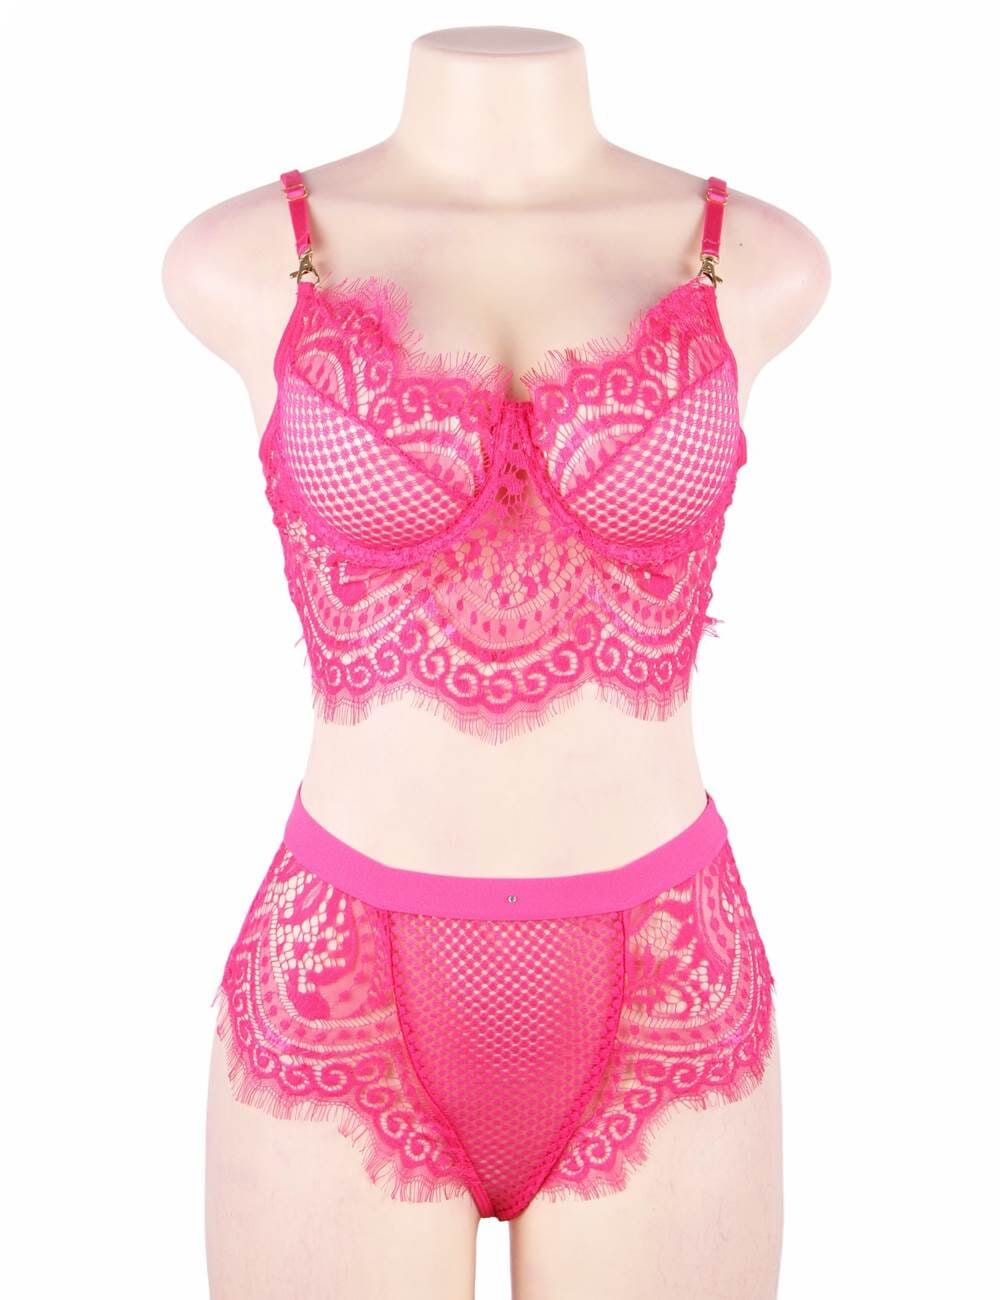 a female mannequin wearing a pink lingerie